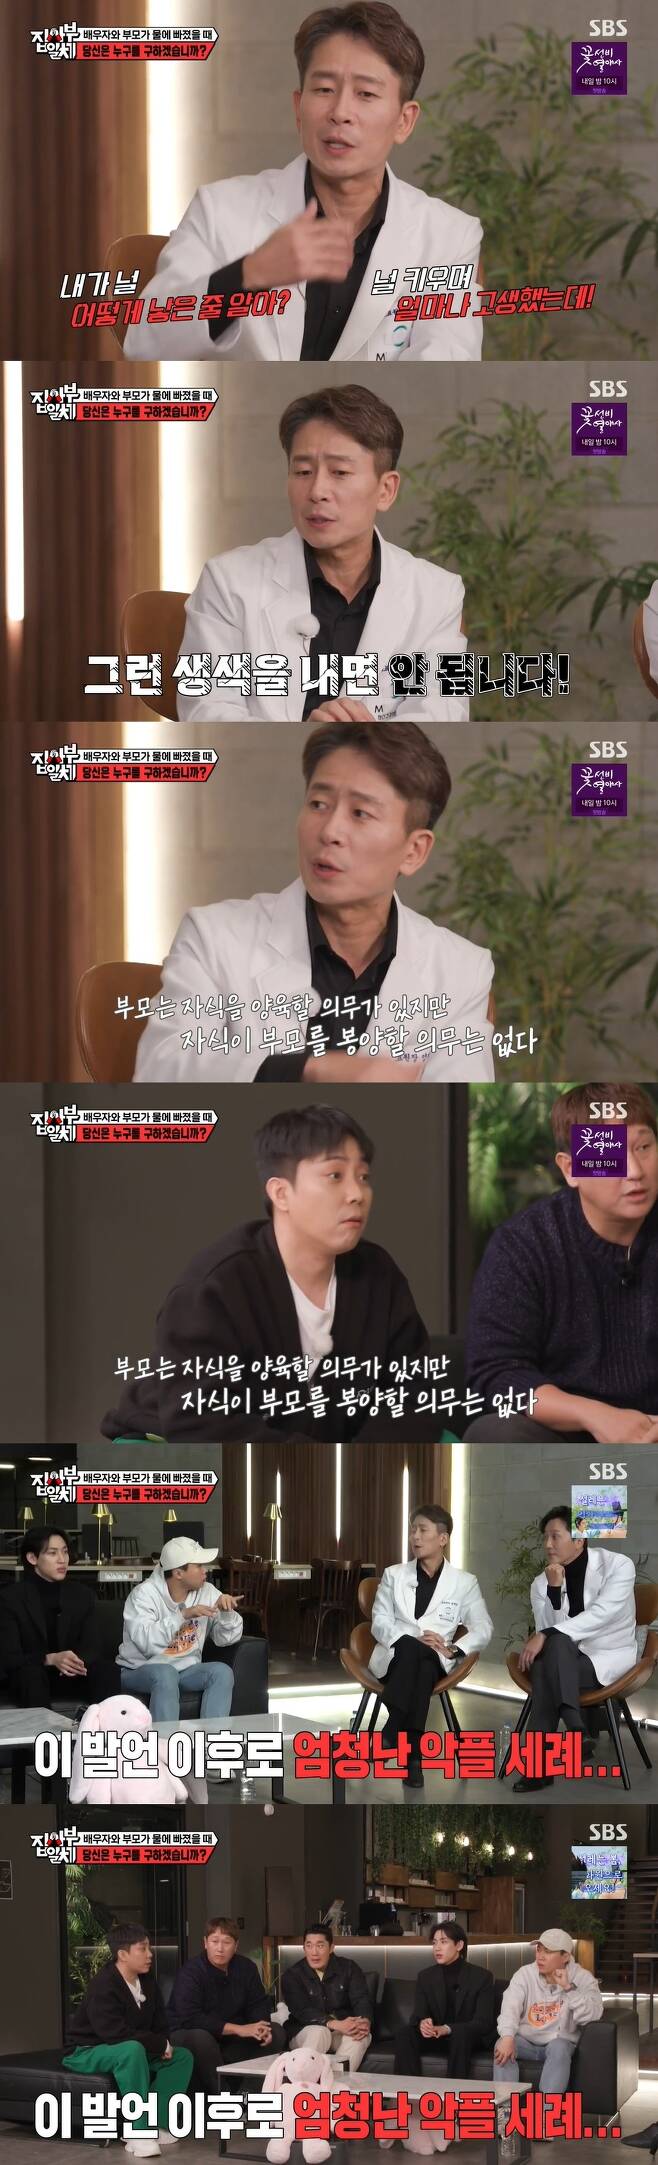 Seoul =) = All The Butlers All 2 yang jae-jin yang jae-woong brothers revealed the story of receiving the evil.In SBS All The Butlers All 2 broadcast on 19th, yang jae-jin, yang jae-woong mental health specialist appeared and talked about the three things to avoid most in my life.yang jae-woong said, If you do not avoid this properly, life will be unhappy.These brothers mentioned the first keyword gas lighting and then the second keyword determination to break up.yang jae-jin said, It means to maintain proper distance rather than to break up. He said, We are talking about Korean independence movement with Parent.yang jae-woong said, According to the survey results, more than half of the unmarried people in their 30s are not doing Korean independence movement.Yang jae-jin went on to say, If we do YouTube, there are no malicious comments, but there have been malicious comments, adding, Its a classic quiz in psychiatry, and theres a question that professors ask for the first time, Who will you save if your mother and spouse fall into the water at the same time?The members responded to the difficult quiz, and yang jae-jin was surprised to say, There is an intention and there is a correct answer.Kim Dong-hyun joked that he was a former Marine and that he would save both of them, but said, No matter how I think about it, I do not think I would have asked my mother to save my daughter-in-law.On the other hand, Eun Ji-won said, My mother seems to push me and my wife seems to live on me.The two doctors revealed their answers.Yang jae-jin said, The point of this quiz is Who am I Choices? He said, Who is the relationship that I made with Choices? I am Choices is a spouse, and it is a psychologically healthy answer to save Choices. Explained.yang jae-jin said, Parent decided to give birth to Mother Courage and Her Children and Choices, but Mother Courage and Her Children came to the world without any Choices and decisions, so it is a natural duty to raise my best and take responsibility for my Choices. Do you know how I gave birth to you?I do not want to make such a complaint, he said.Parent has an obligation to nurture Mother Courage and Her Children, but Mother Courage and Her Children are not obliged to support Parent, he said. So the evil is the Parent generation, and the sympathy is the younger generation.In fact, it is the first time in the world that I have ever seen a child. In fact, it is the first time in the world that I have ever seen a child. In fact, it is the first time in the world that I have ever seen a child. I did it.Mother Courage and Her Children are born and raised by Parent, but from this time on, it is time to prepare for the Korean independence movement, he added.yang jae-jin also said, Children are embarrassed at that time. I am angry with Parent, I do not know why I am angry, I do not know why I hate this house, and I do not know why I hate it. He said.It is important how well you pass that puberty and how well you maintain your emotional distance, he said. If you have finished your emotional Korean independence movement, you should do Indian, physical and mental independence movements in adolescence.Among them, the Indian Korean independence movement is the most important, he said. As long as I have Indian support from someone, I have a stake in my life, so the most important life homework in my 20s is employment.The important thing is to be an adult responsible for my Choices, said yang jae-woong. People who grew up without puberty go to the job that Parent wants and get married, there are no self-choices in it, I do not care when things are good and the relationship is good, but when I do not, I look for the cause of Choices in Parent.Yang jae-jin also emphasized that Parent and Mother Courage and Her Children maintain peaceful relations, he said.